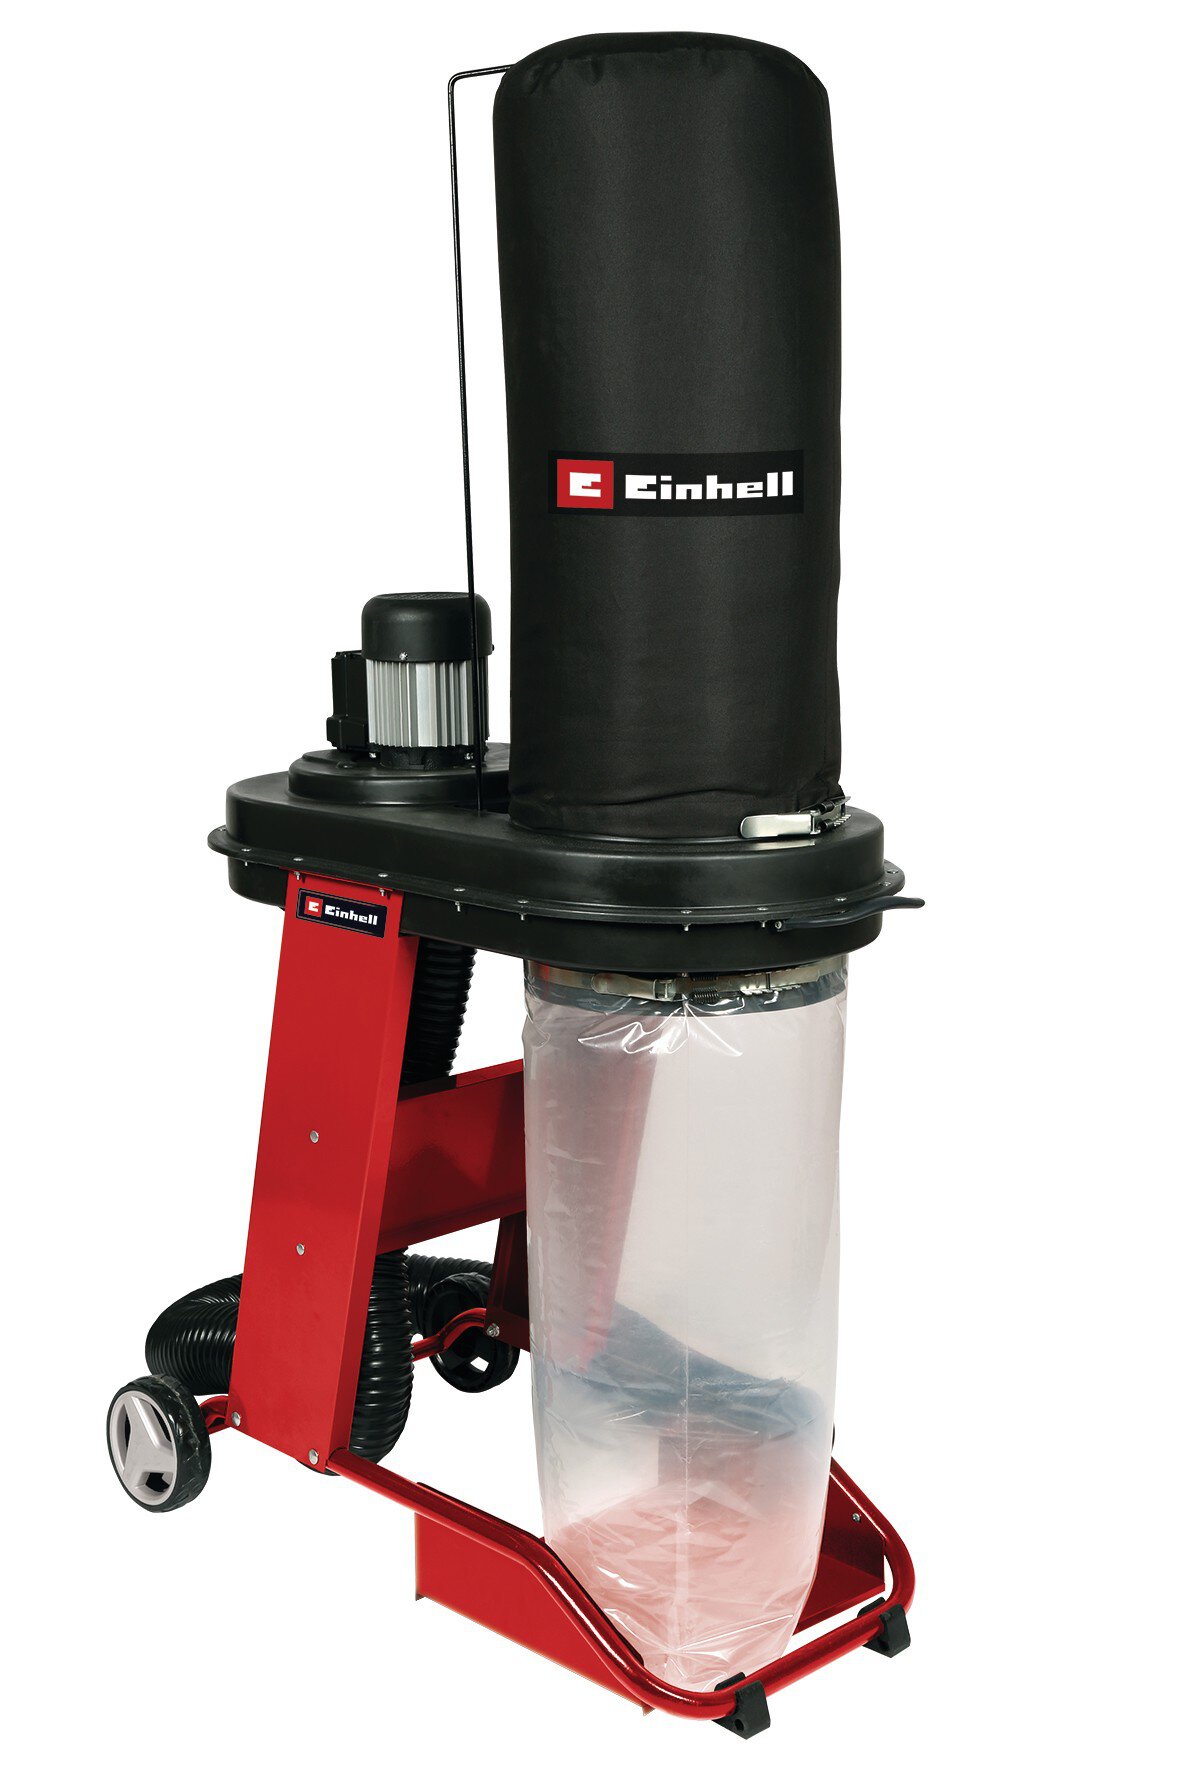 More practical machines and ideas for DIYers | Einhell.ba